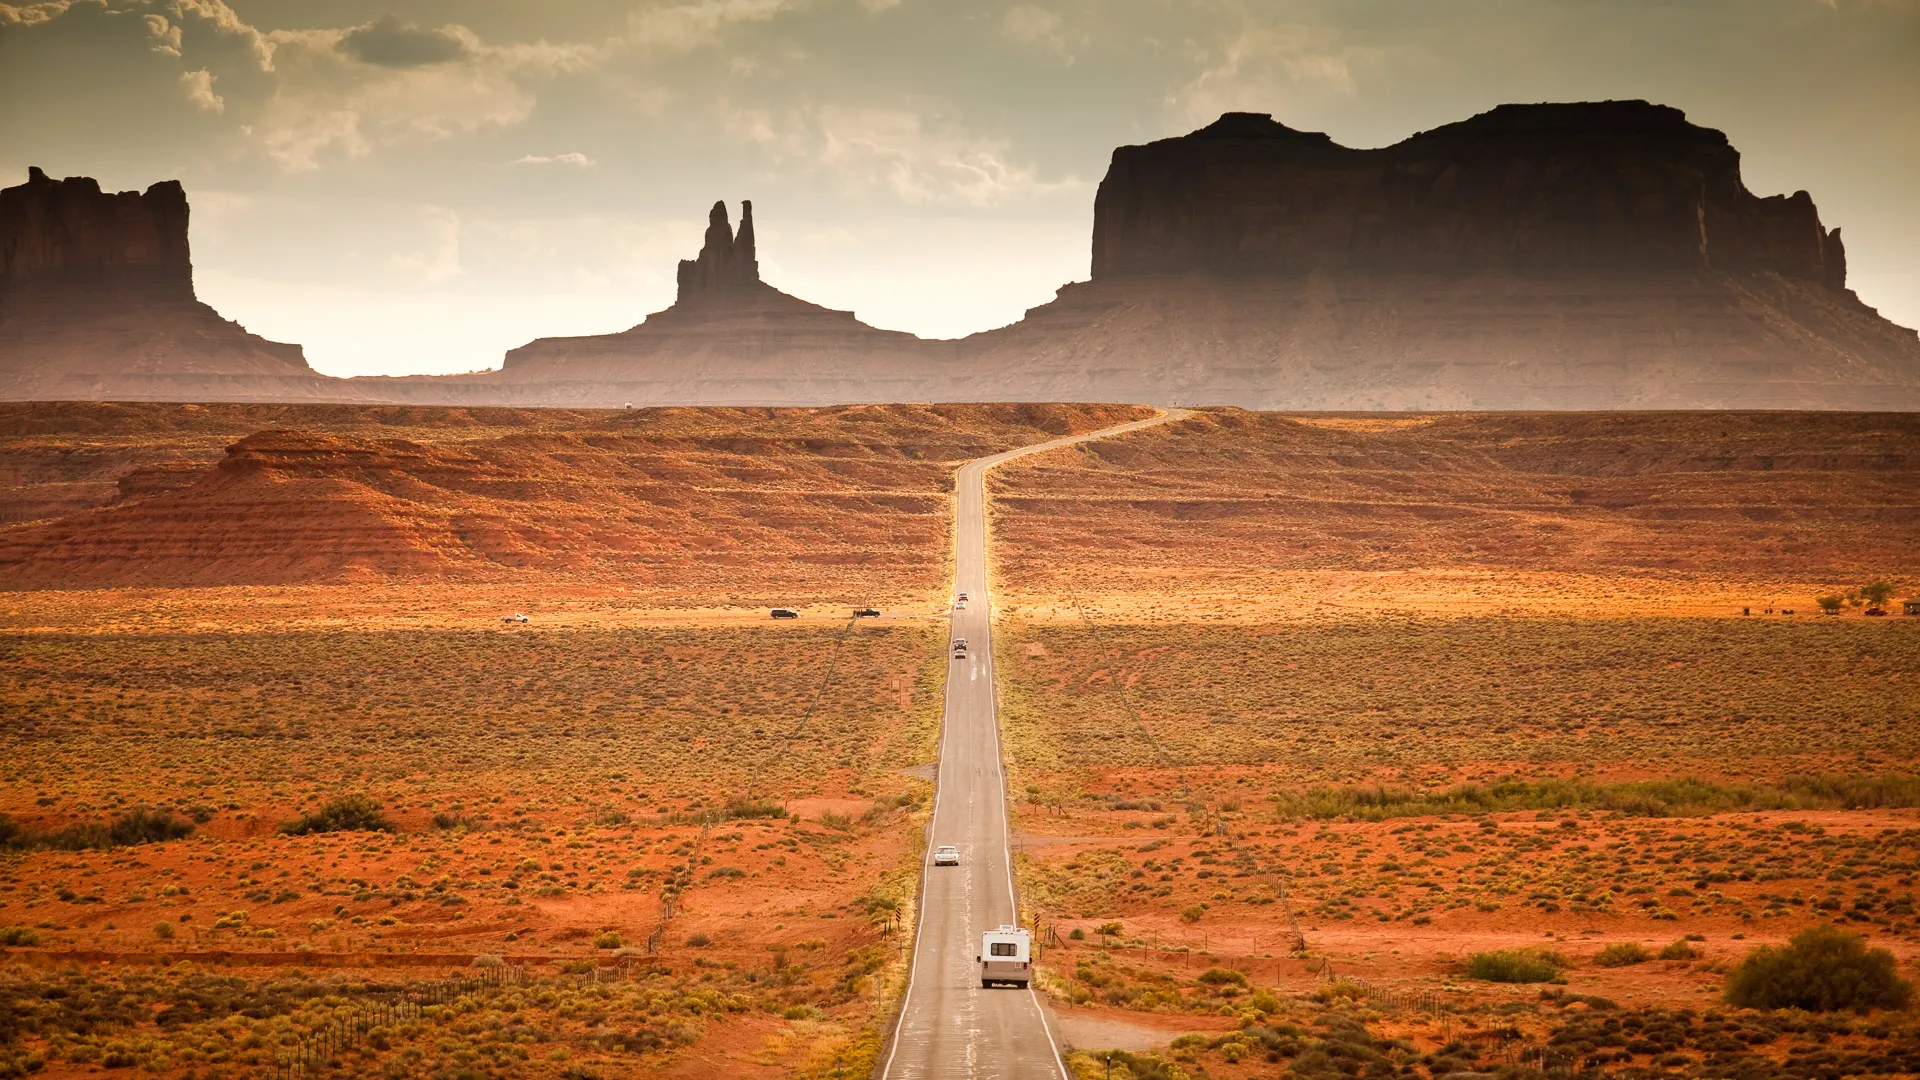 Motor home camper on vacation in the southwest USA red rock landscape near Monument Valley Arizona.